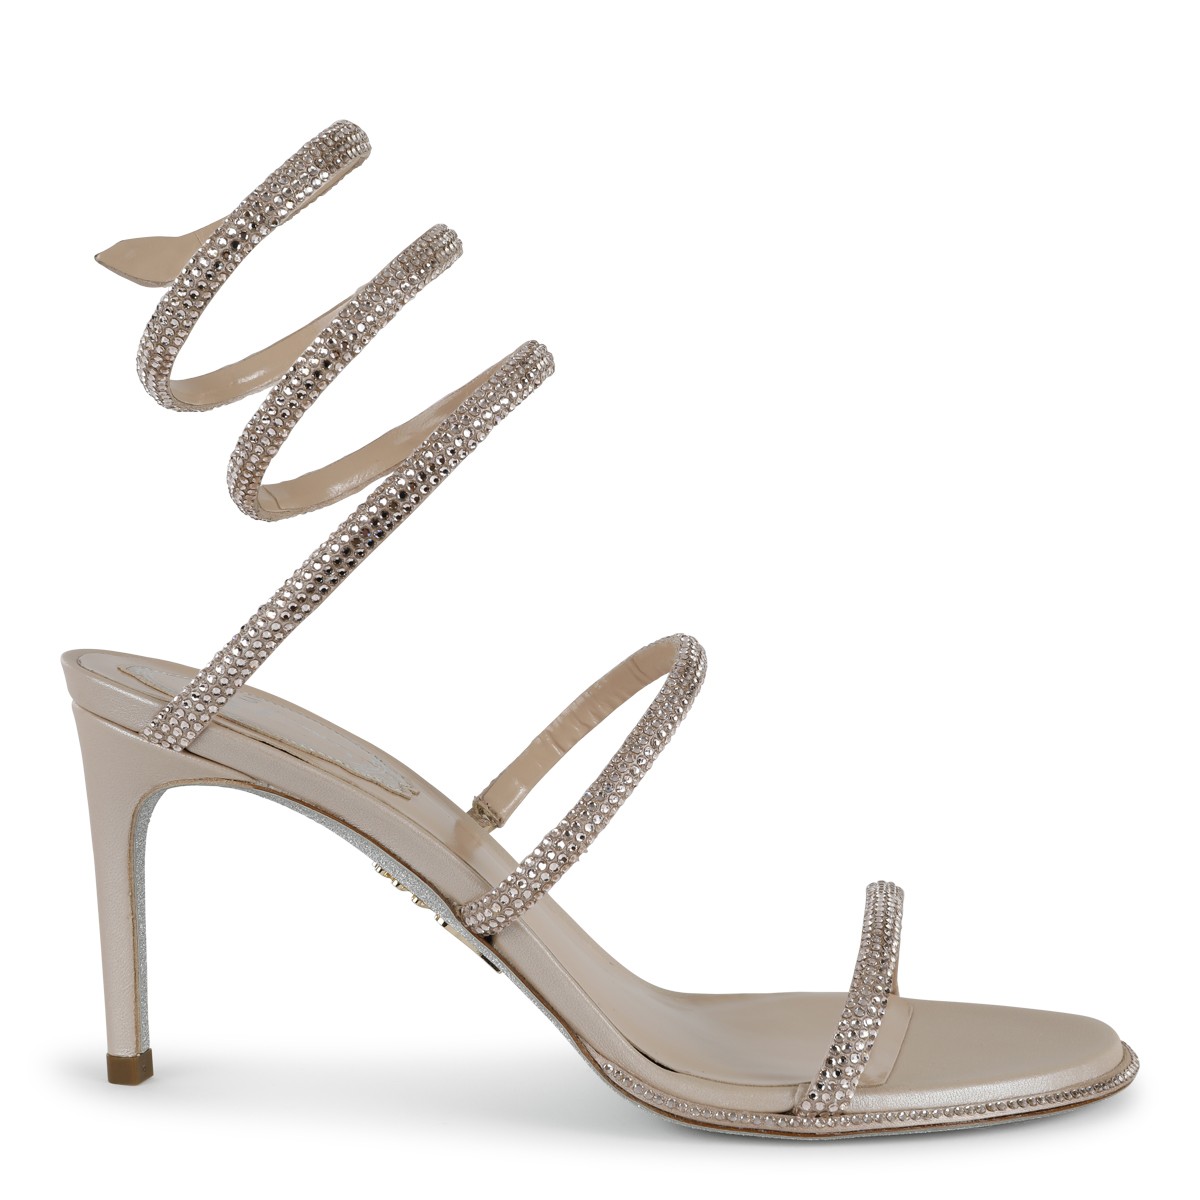 NUDE LEATHER SANDALS